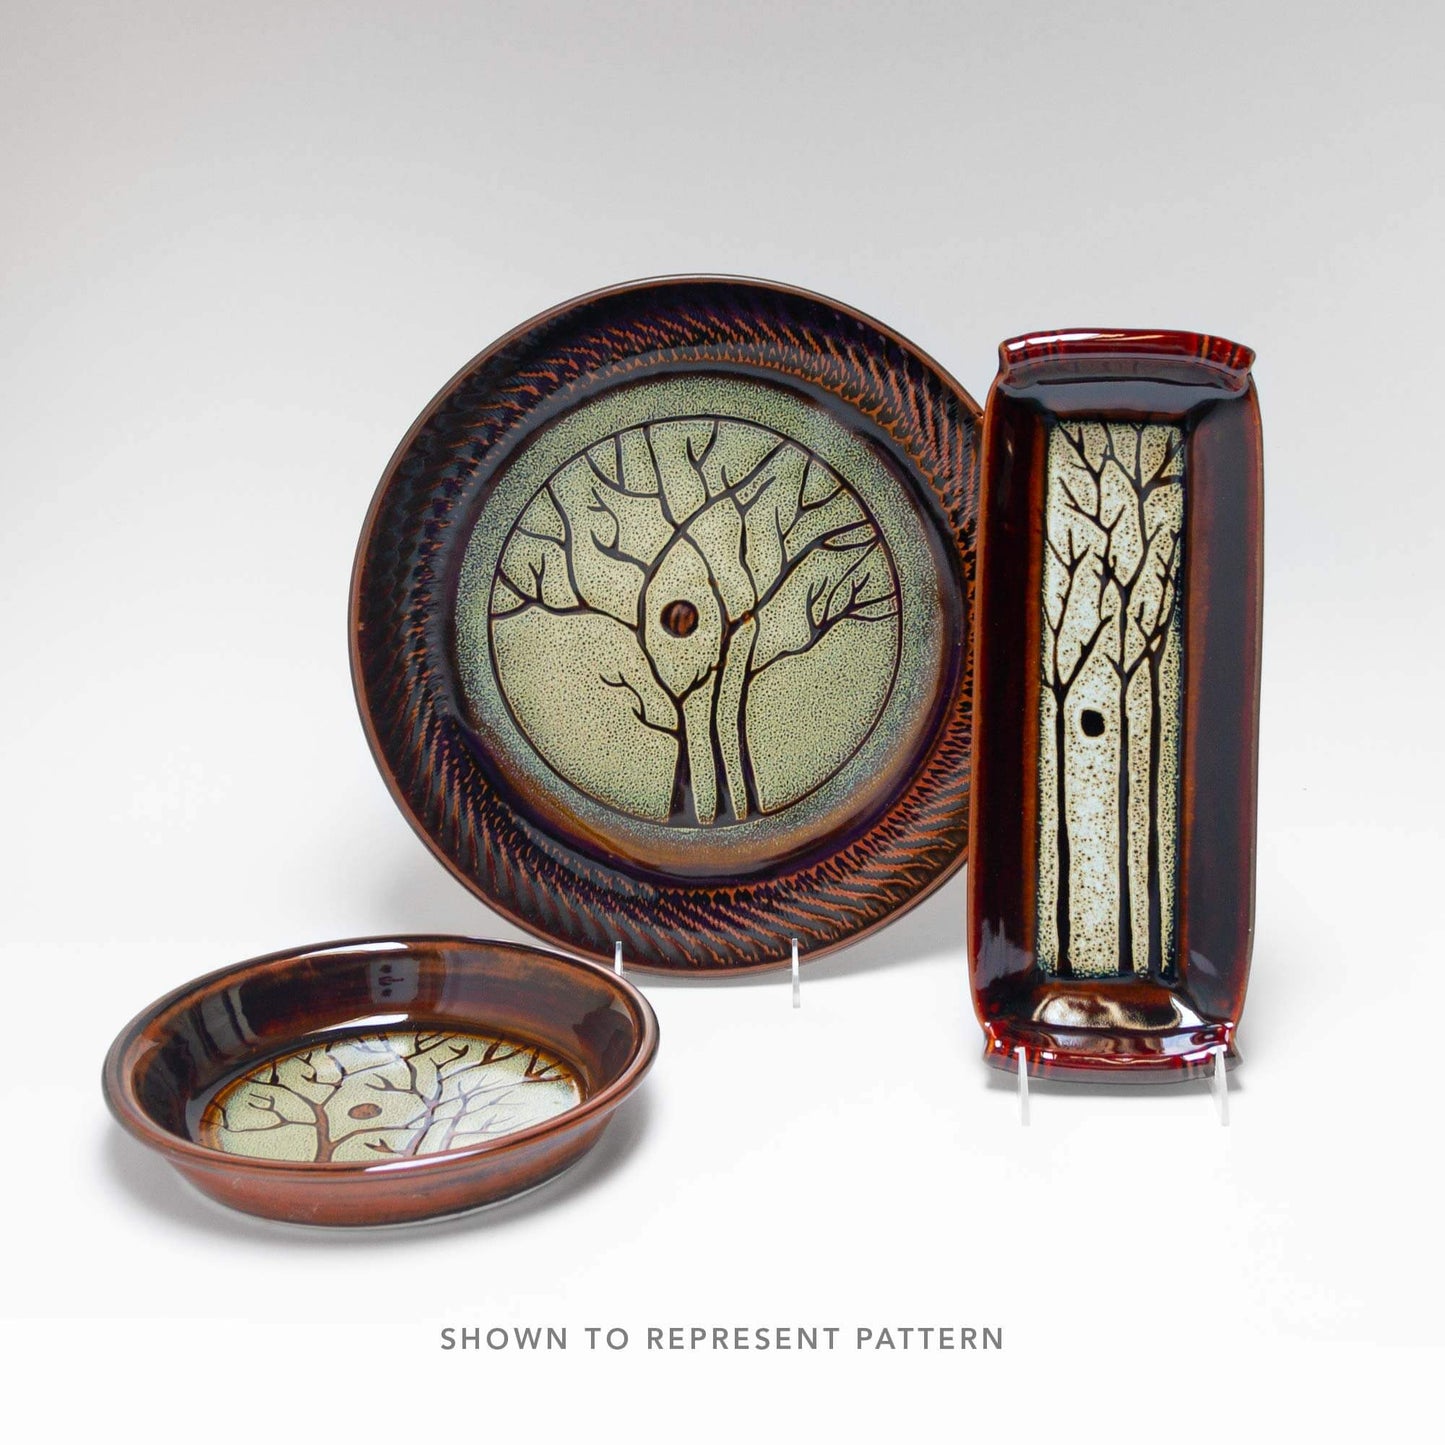 Handmade Pottery Serving Pasta Bowl in Hamada Tree pattern made by Georgetown Pottery in Maine